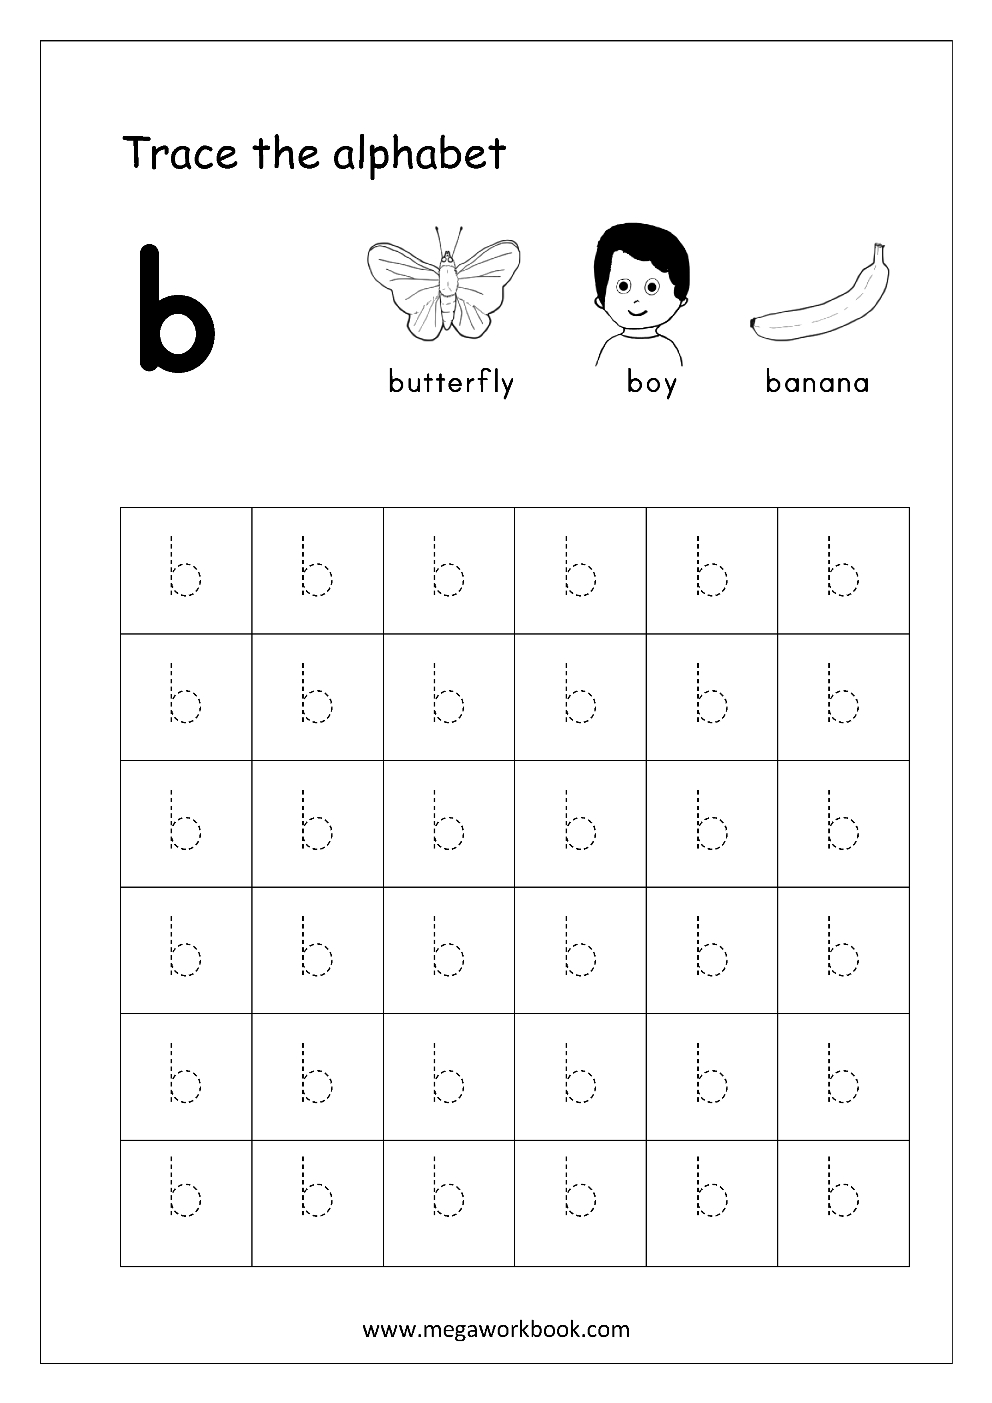 Free English Worksheets - Alphabet Tracing (Small Letters intended for Letter Tracing Worksheets Lowercase